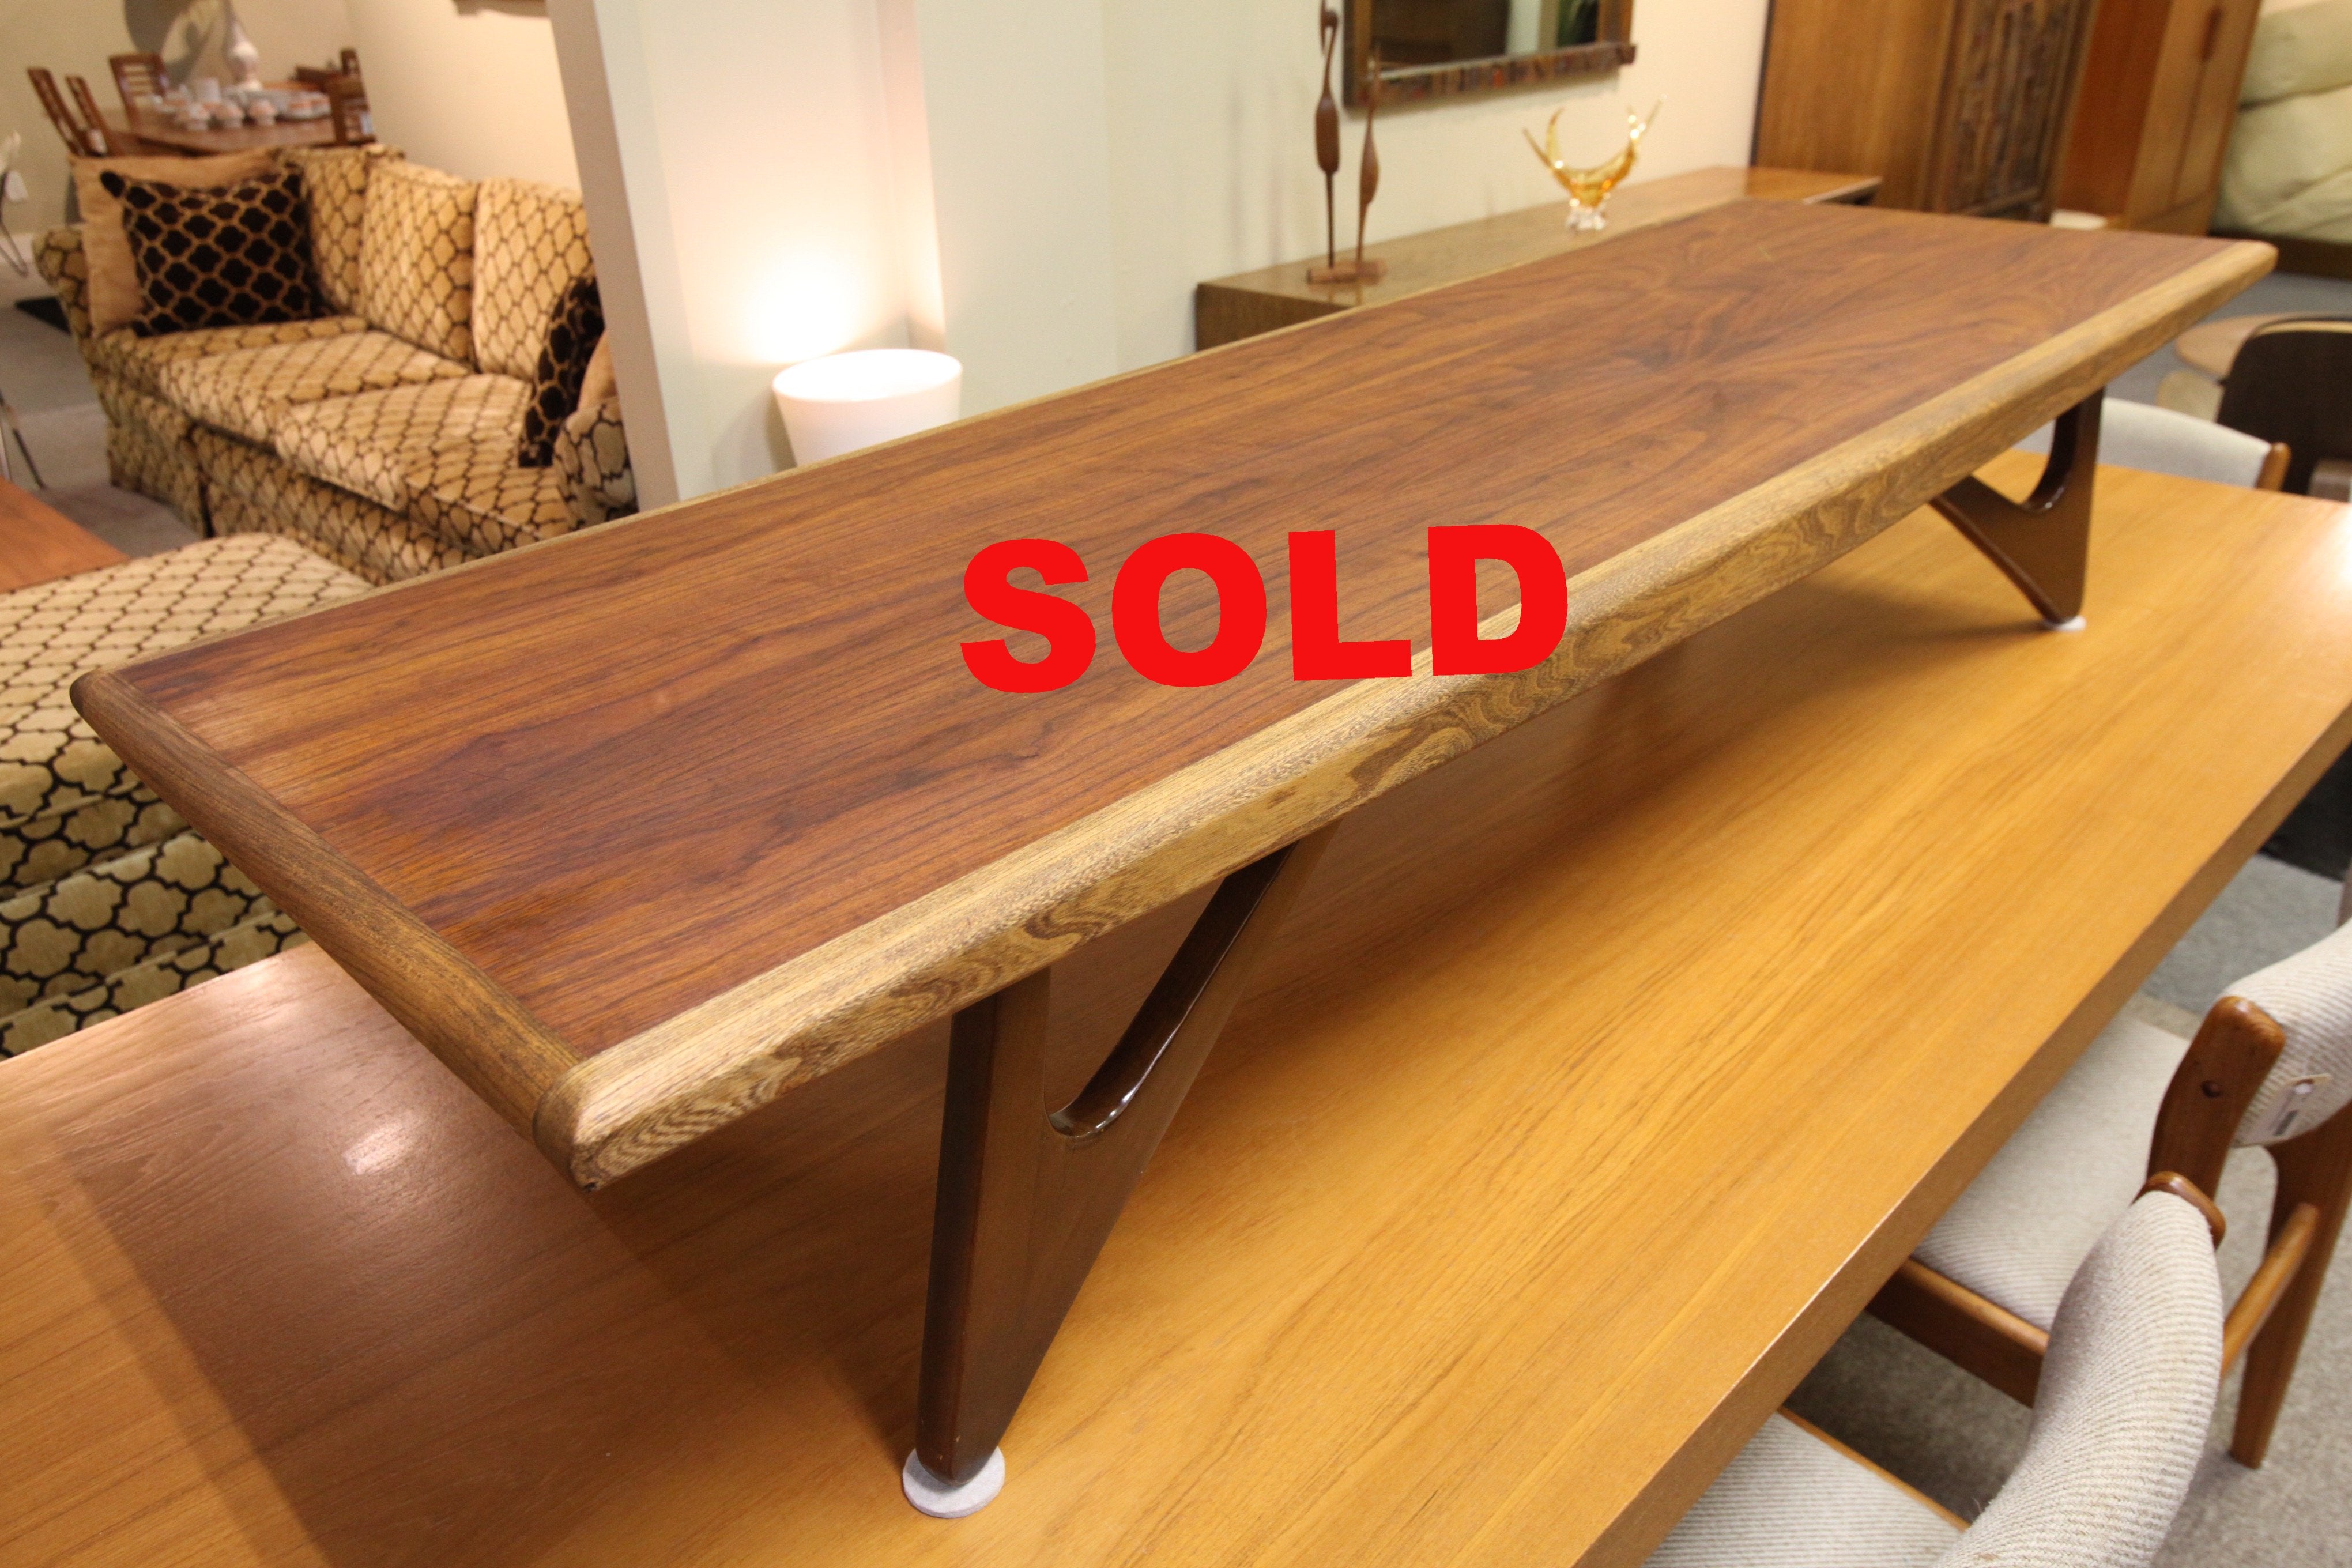 Kroehler - Adrian Pearsall Style Coffee Table (70"L x 22"W x 13.5"H)